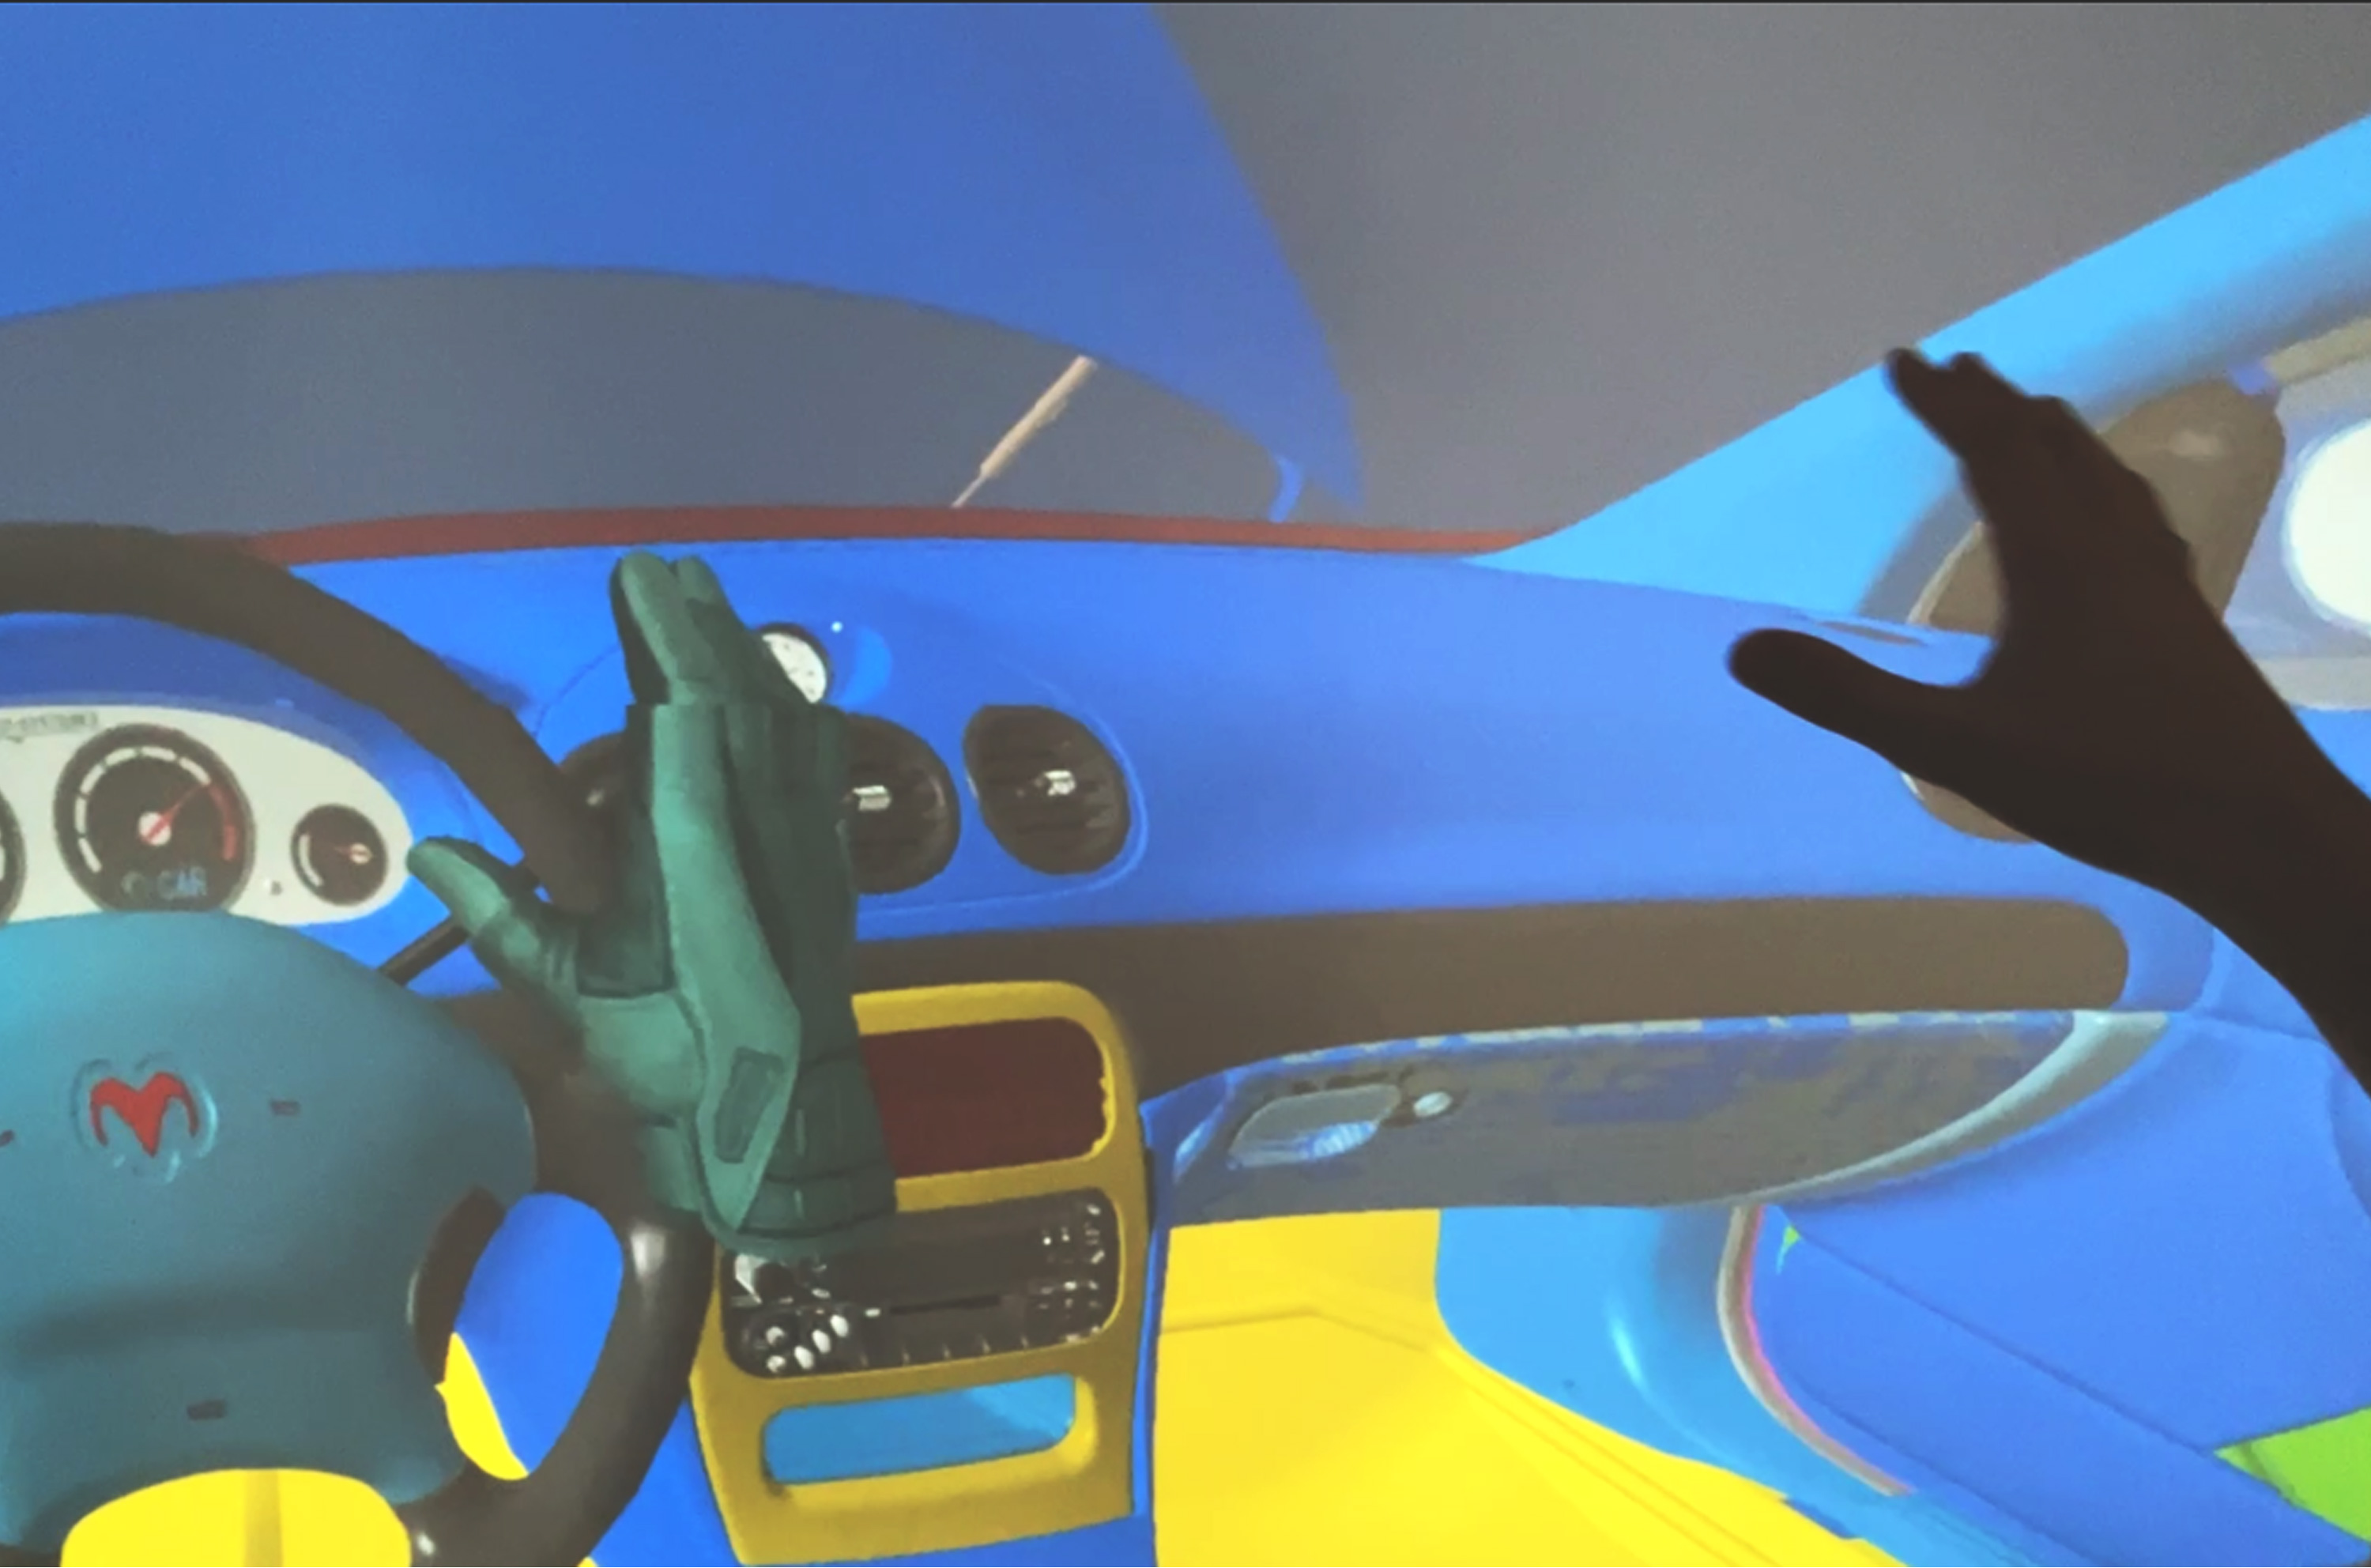 Finger-tracking-driving-simulation-in-virtual-reality